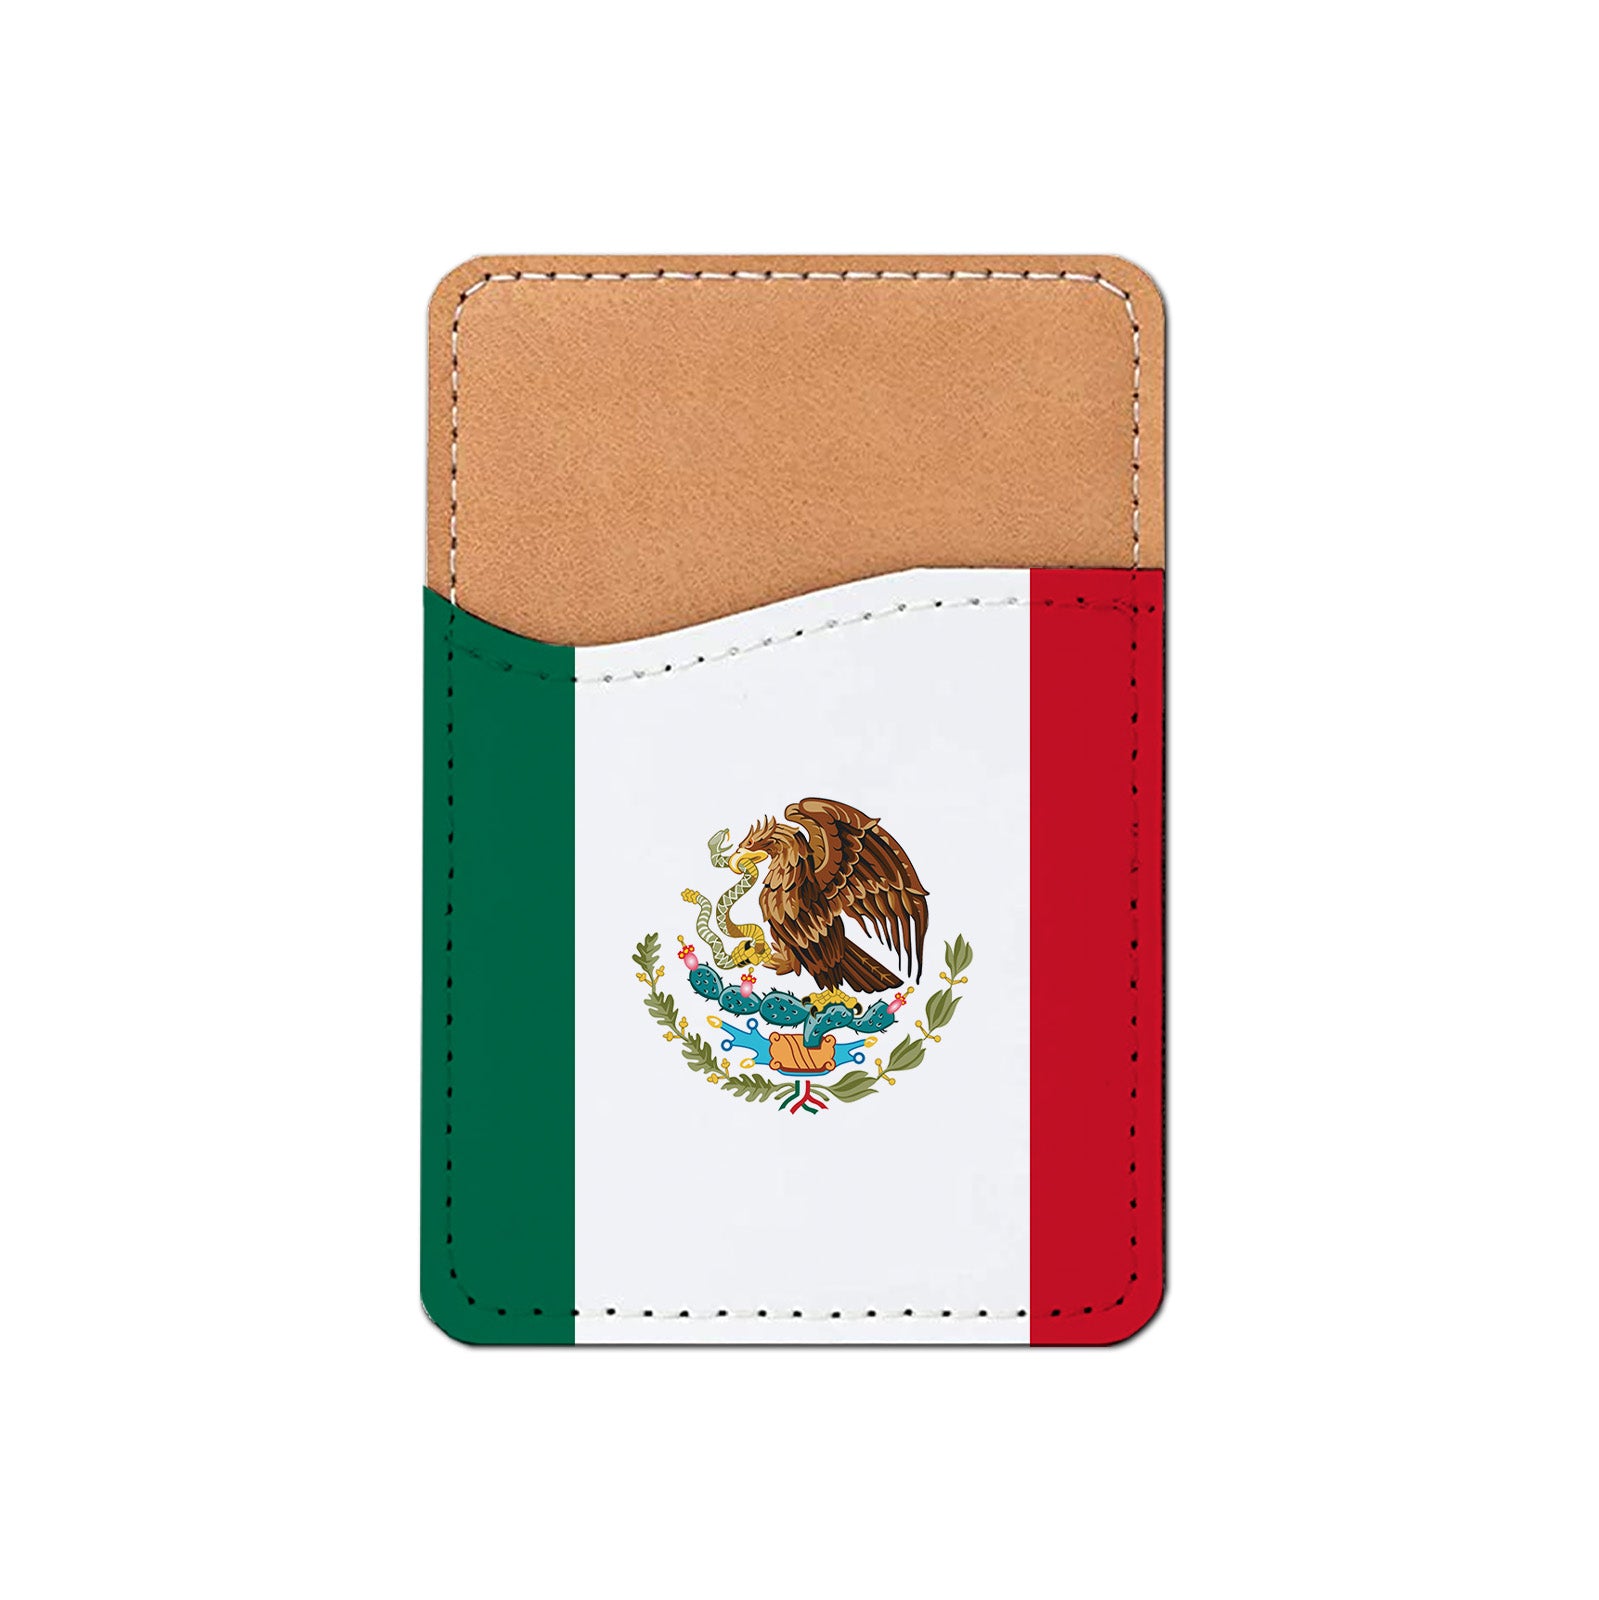 Pick Your World Flag - Stick On PU Leather Phone Wallet Card Holder for 1-2 cards